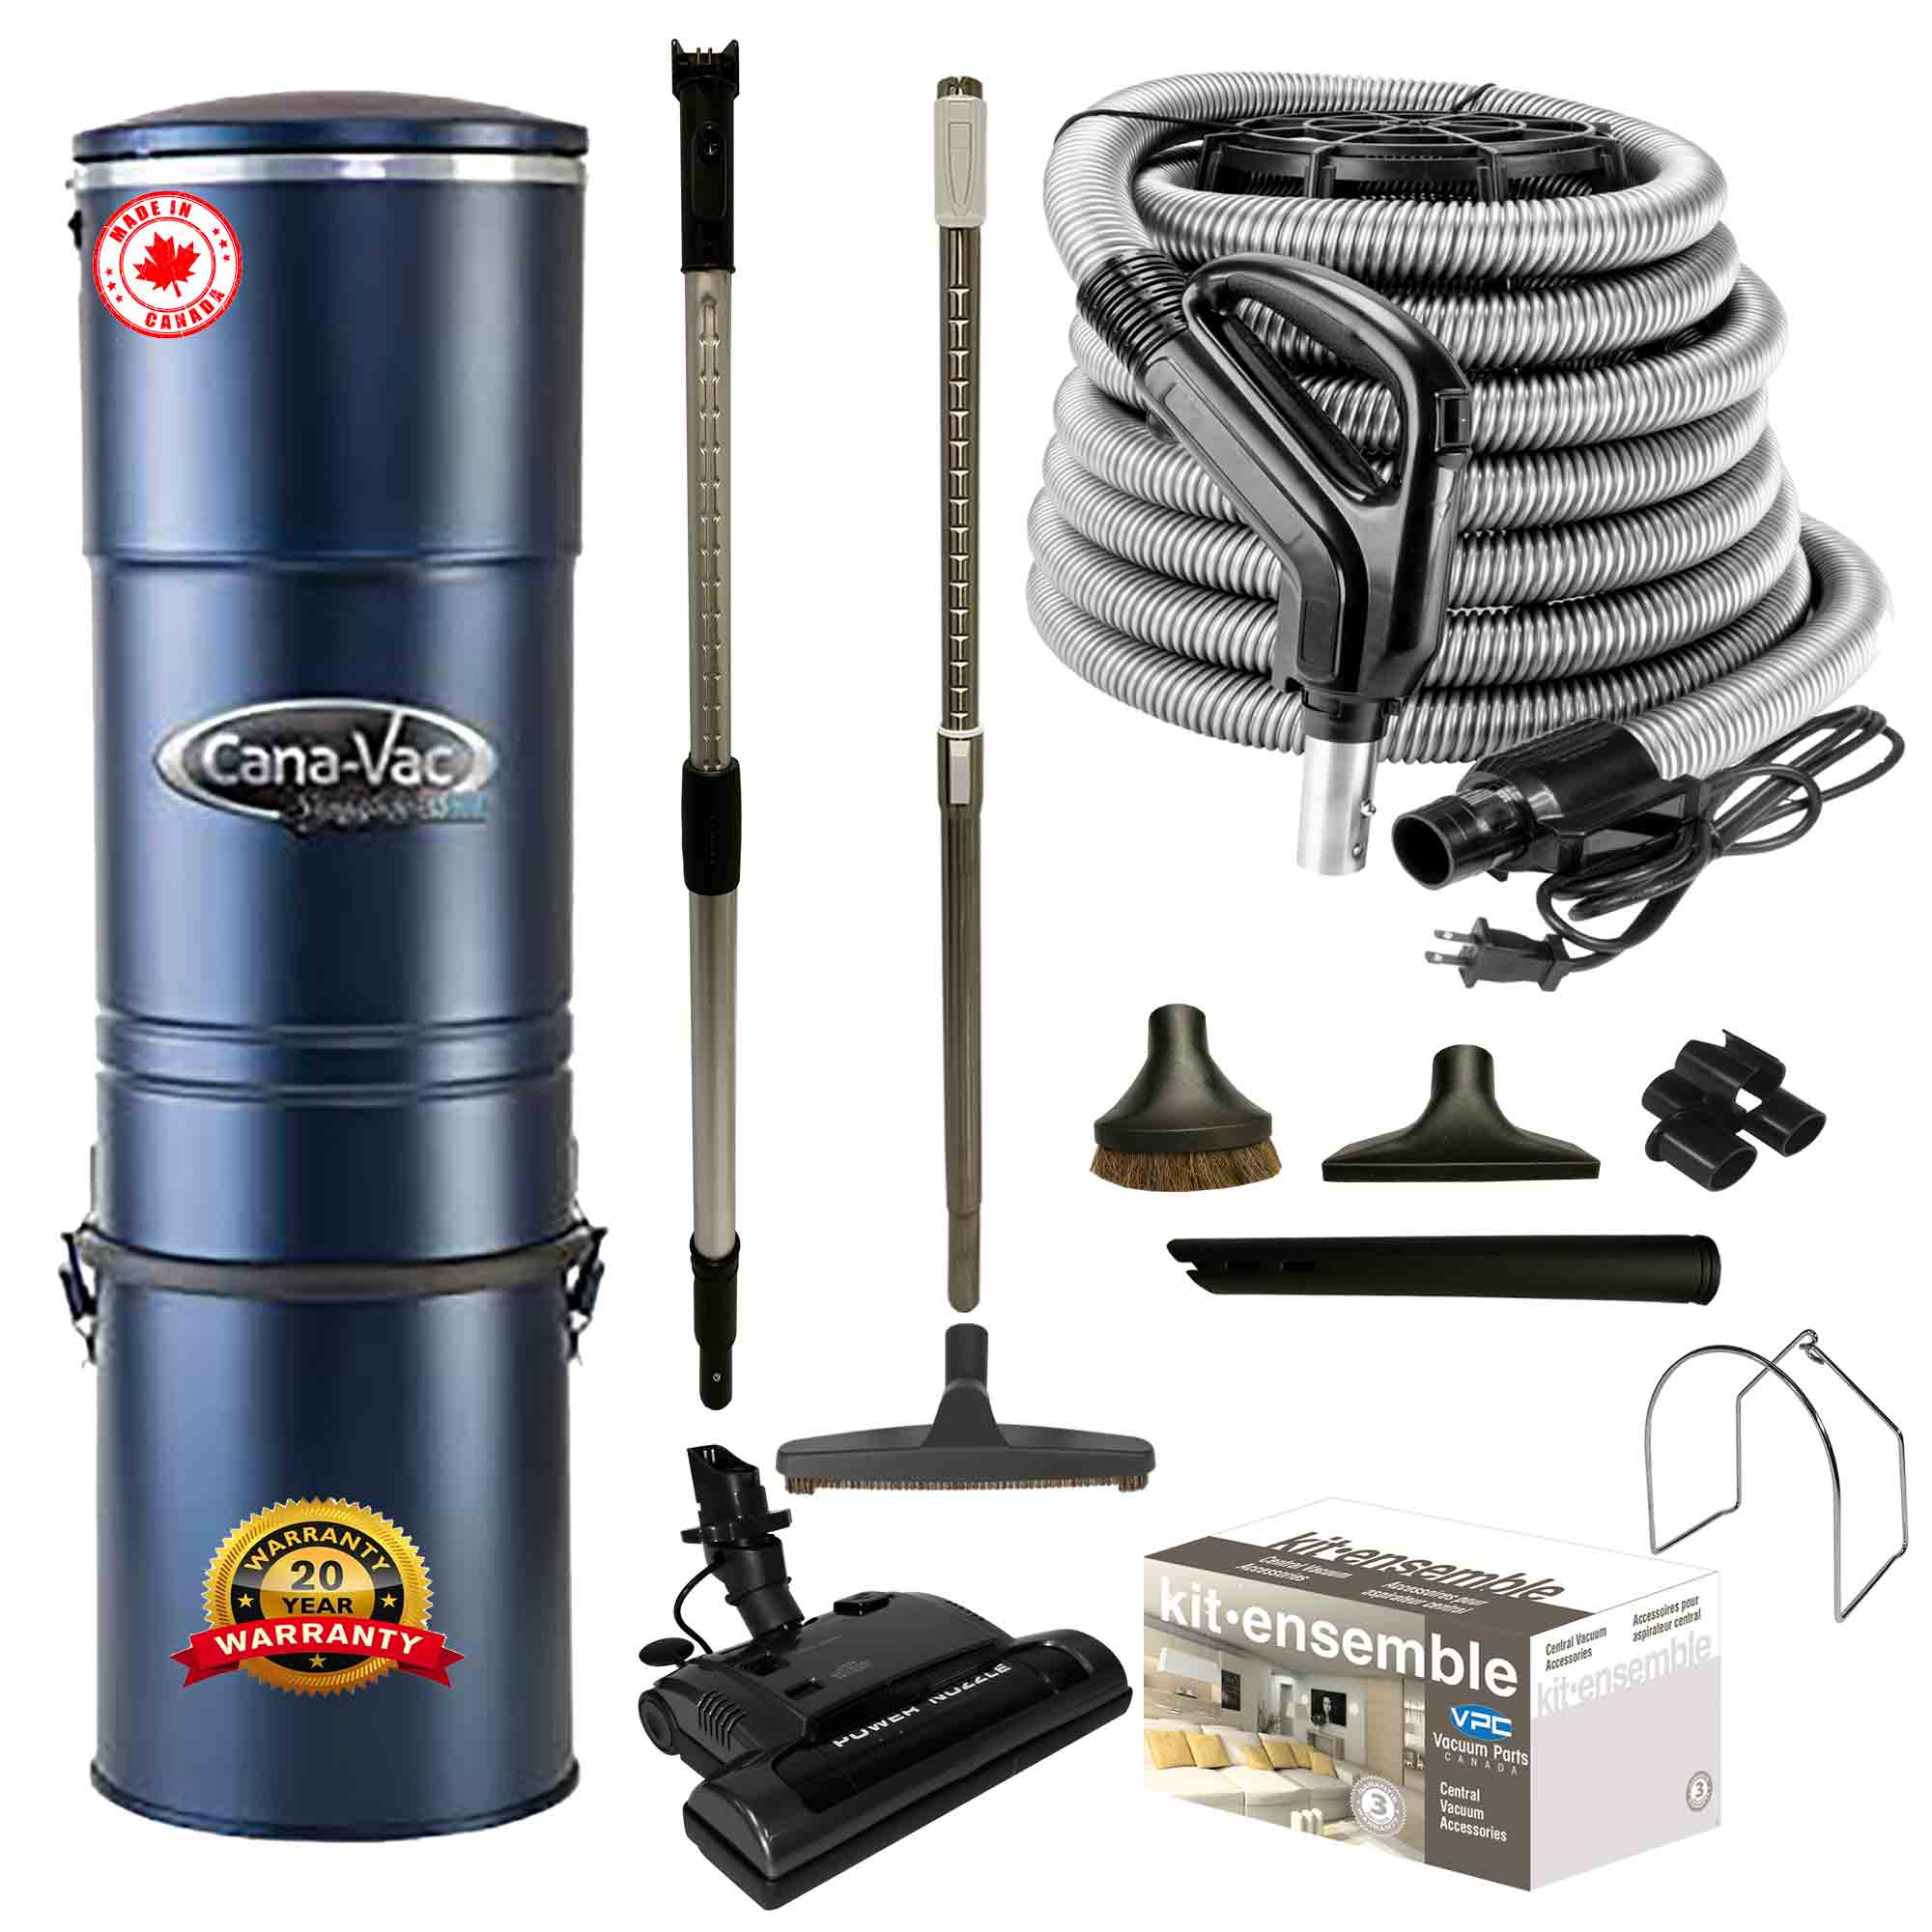 Cana-Vac LS690 Central Vacuum with Standard Electric Package (Black)